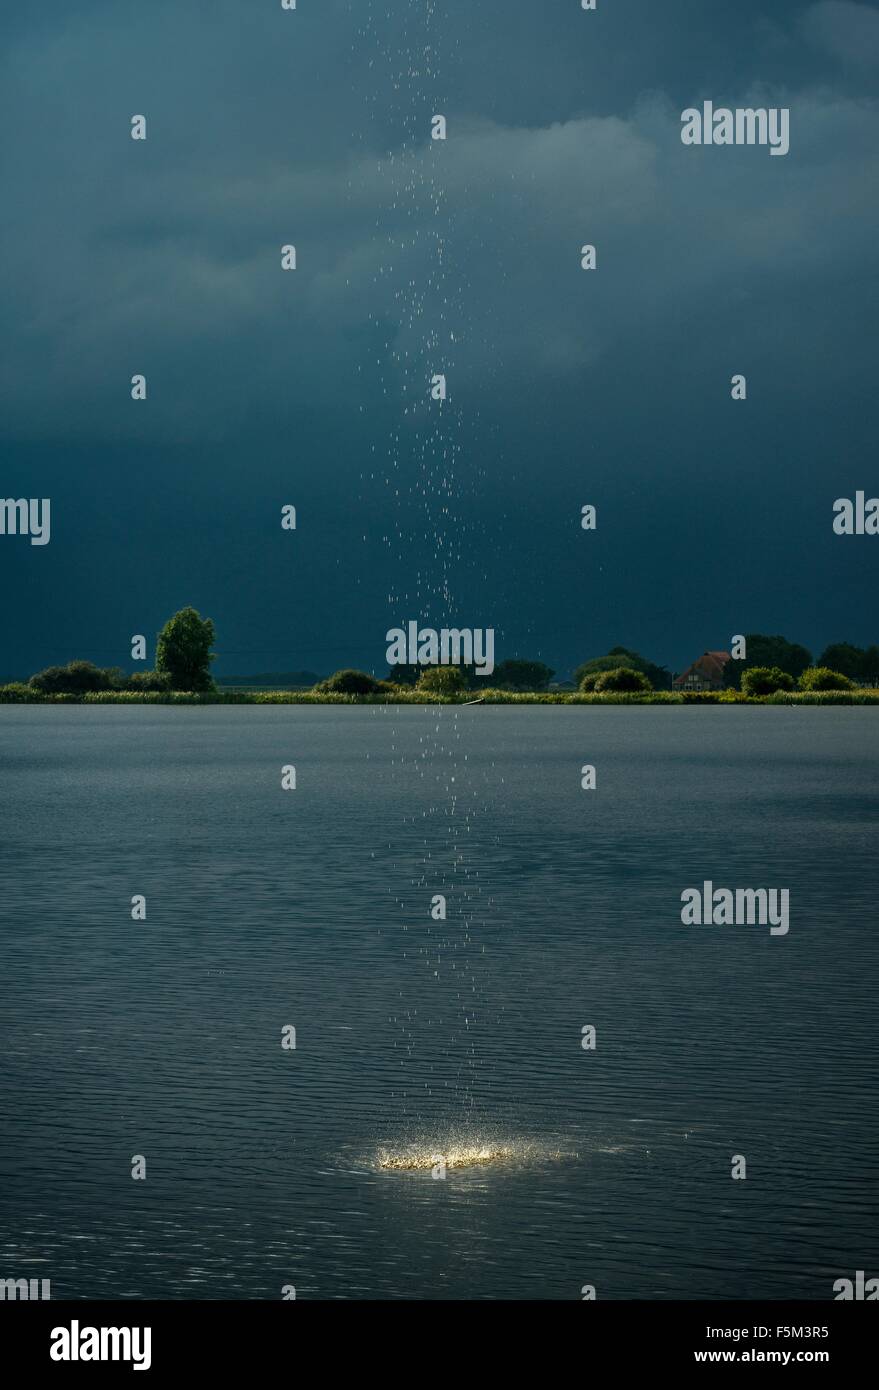 Heavy rainfall and droplets splashing into lake during thunderstorm Stock Photo